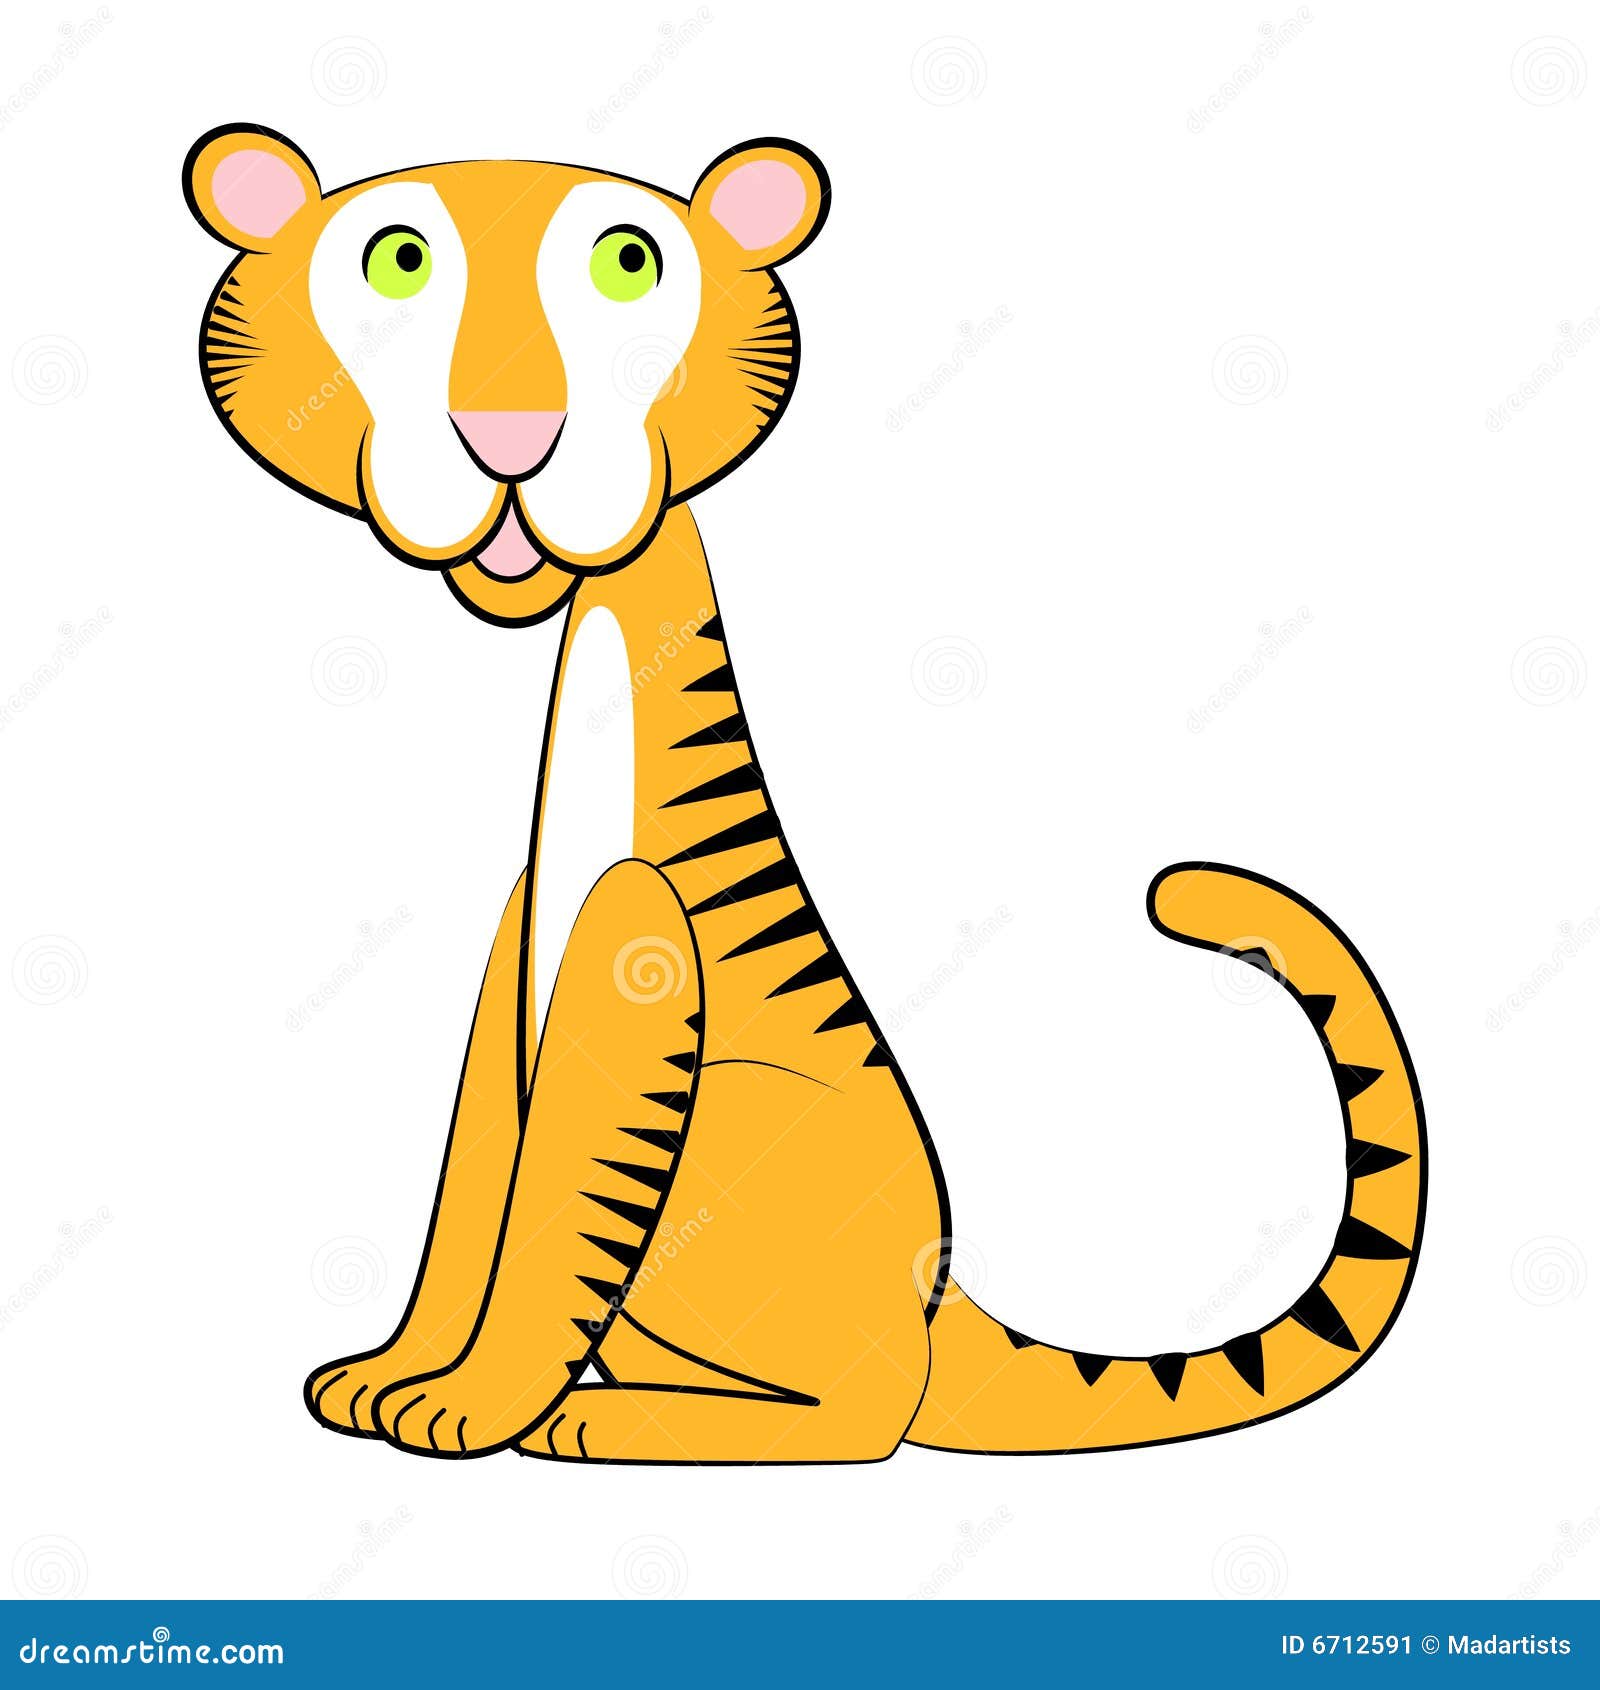 zoologist clipart - photo #42